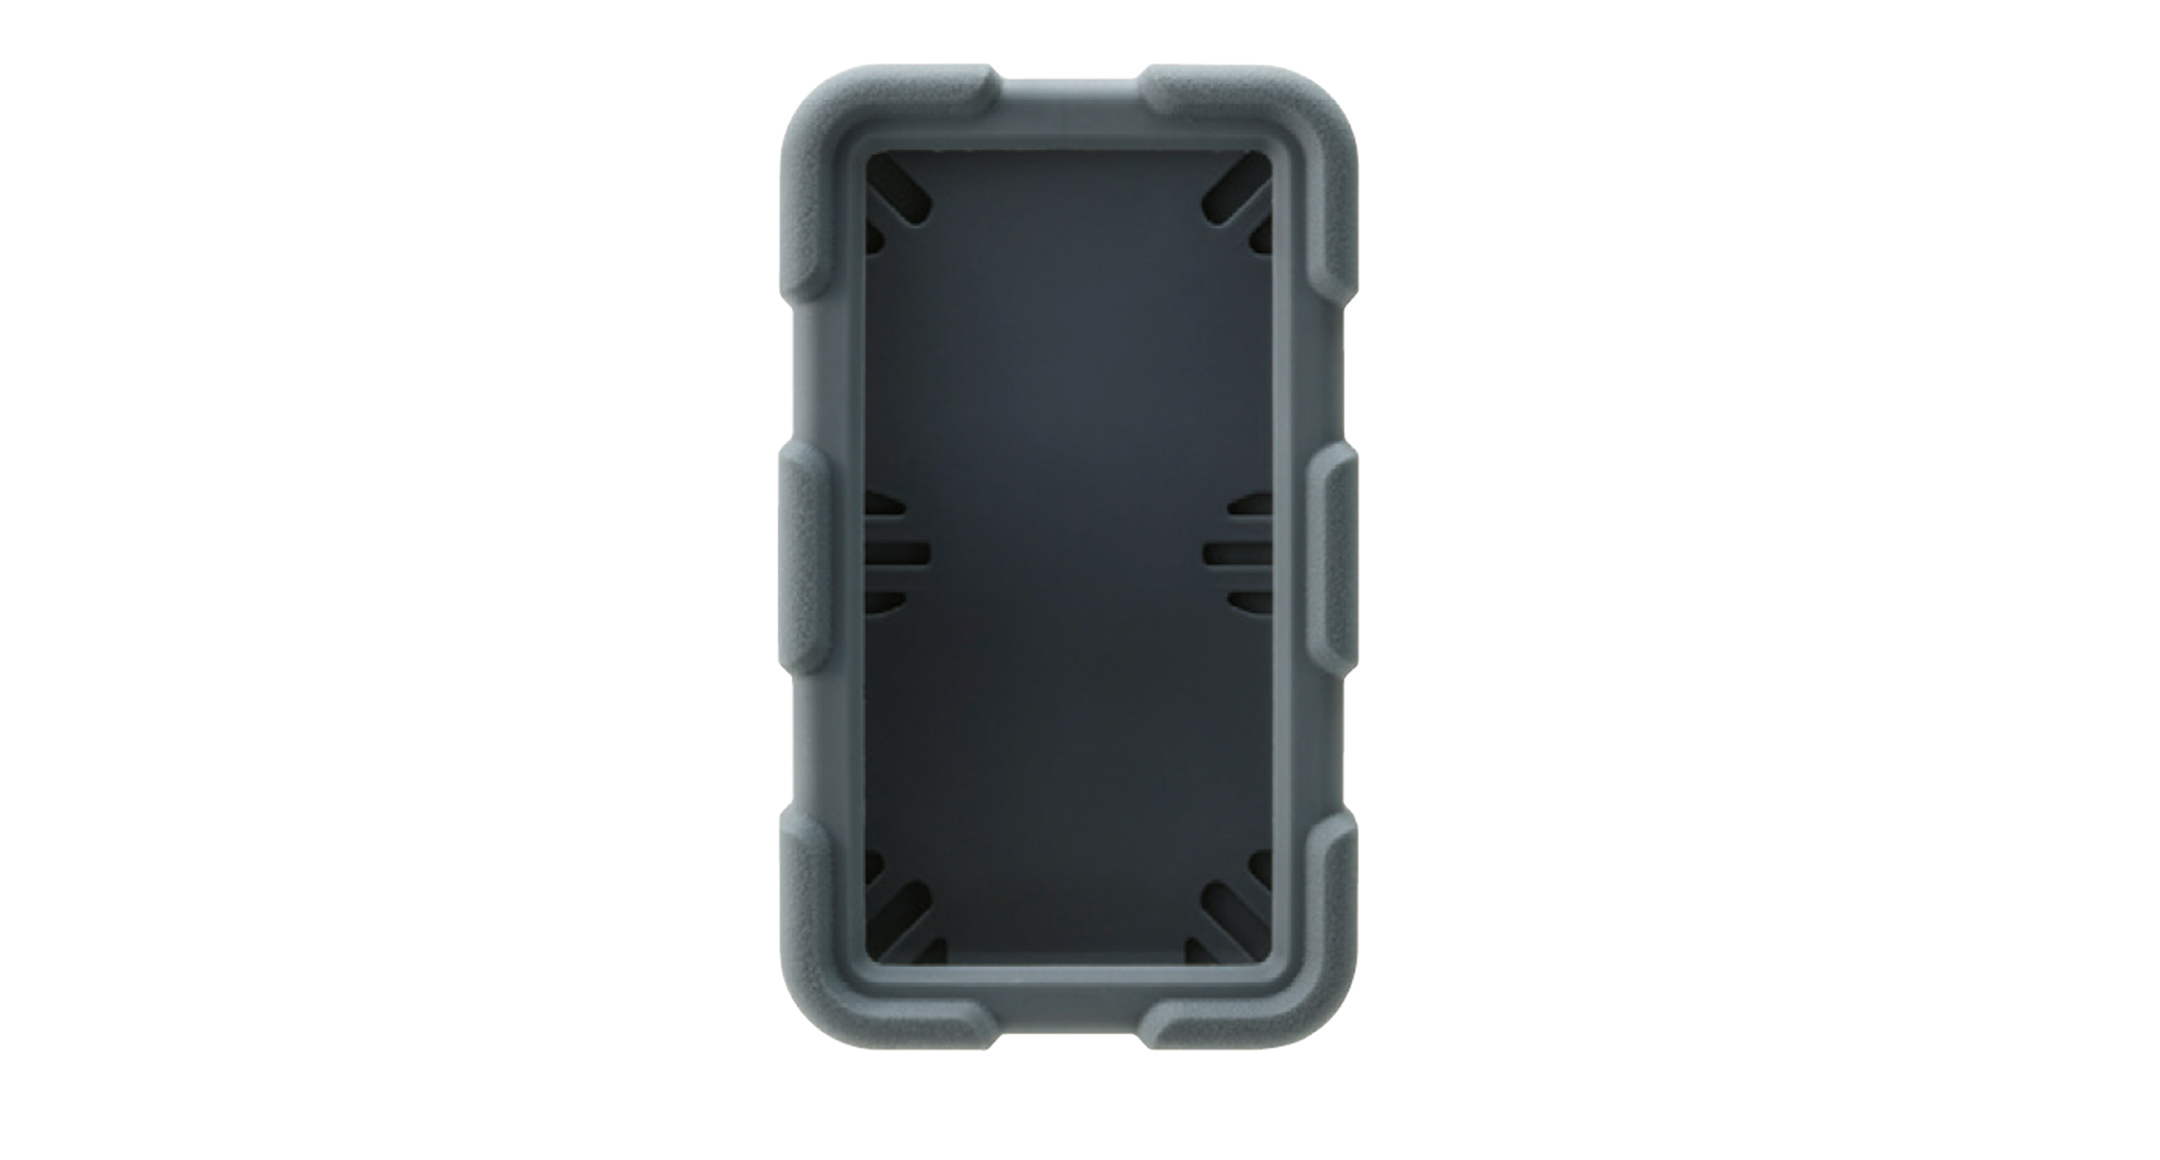 SHOCKPROOF SILICONE COVER for LC series:Dark gray (Similar to PANTONE Cool Gray 11C)